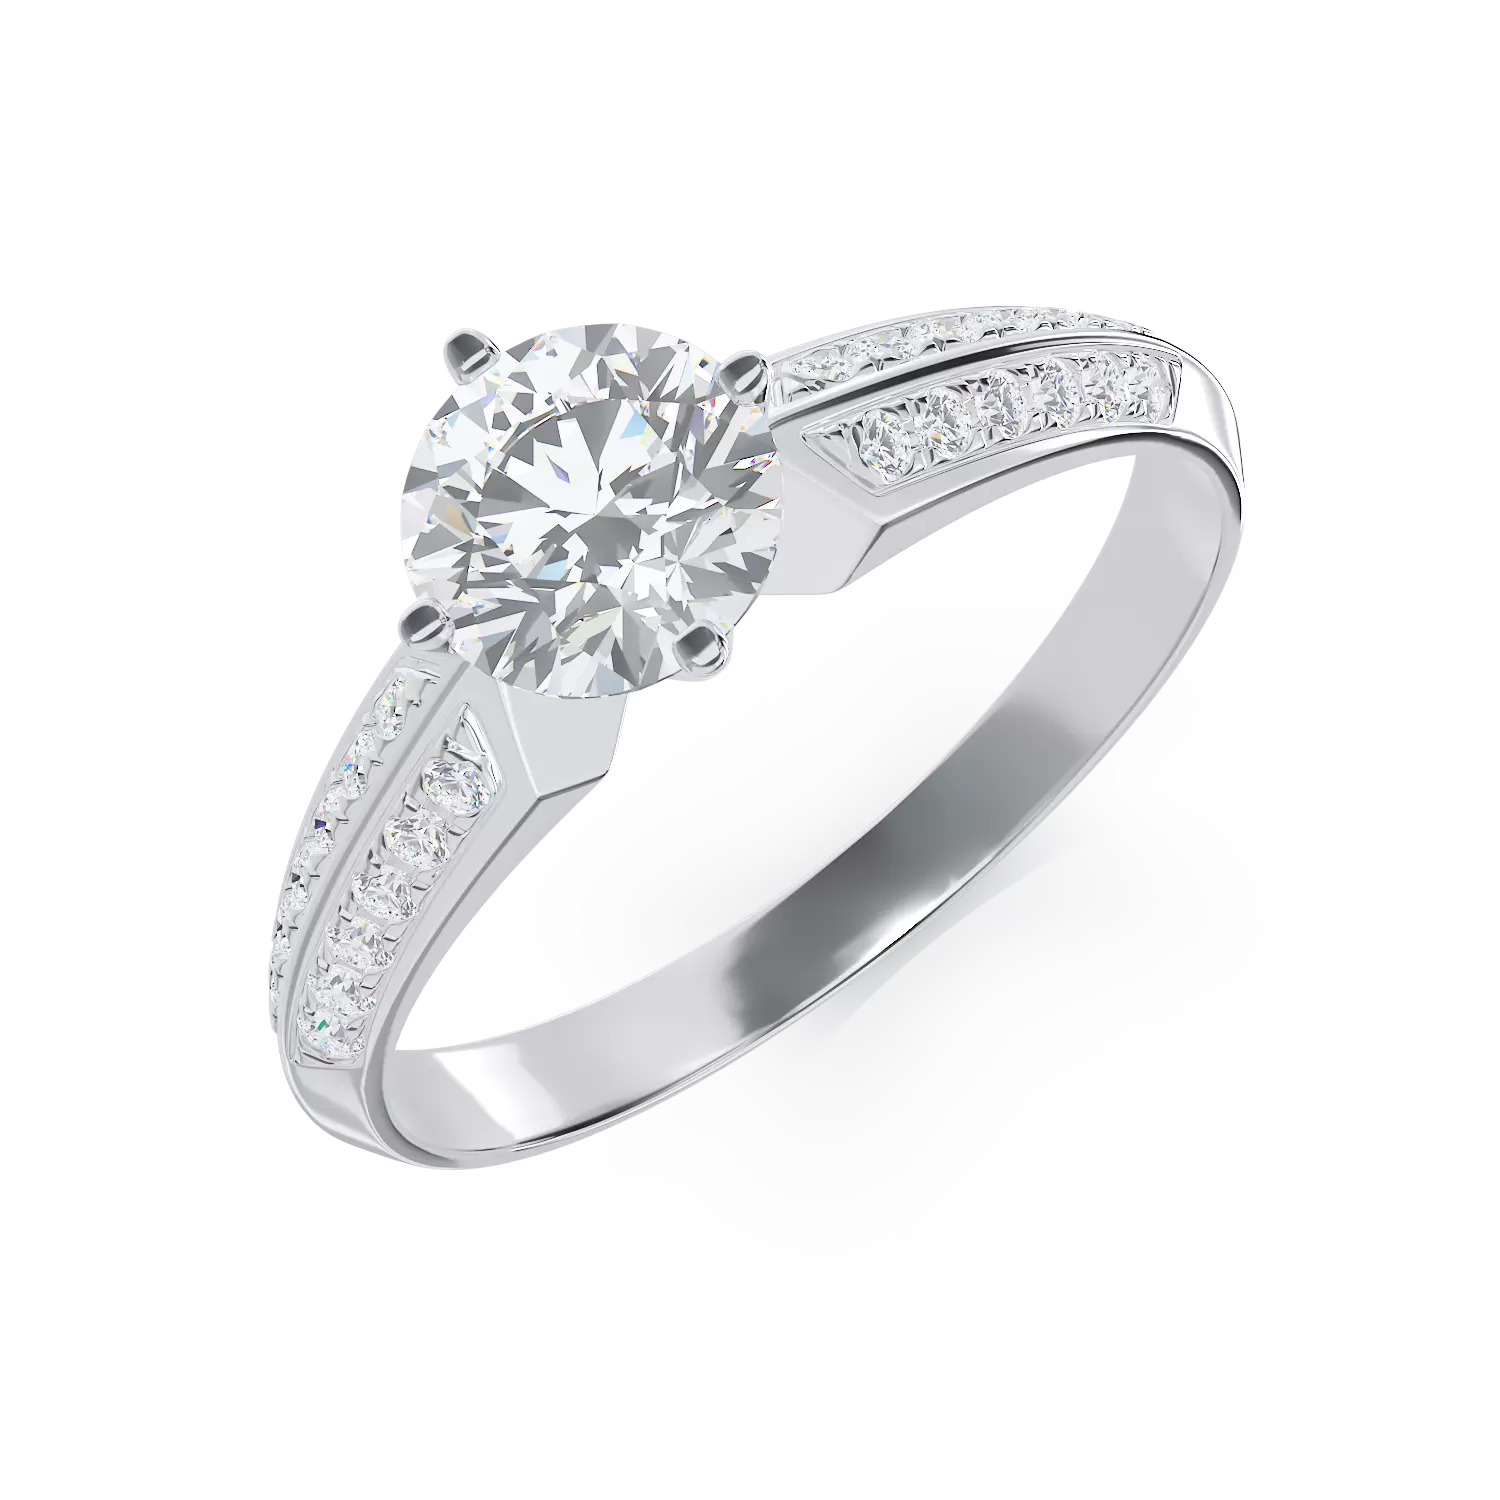 18K white gold engagement ring with 0.59ct diamond and 0.09ct diamonds